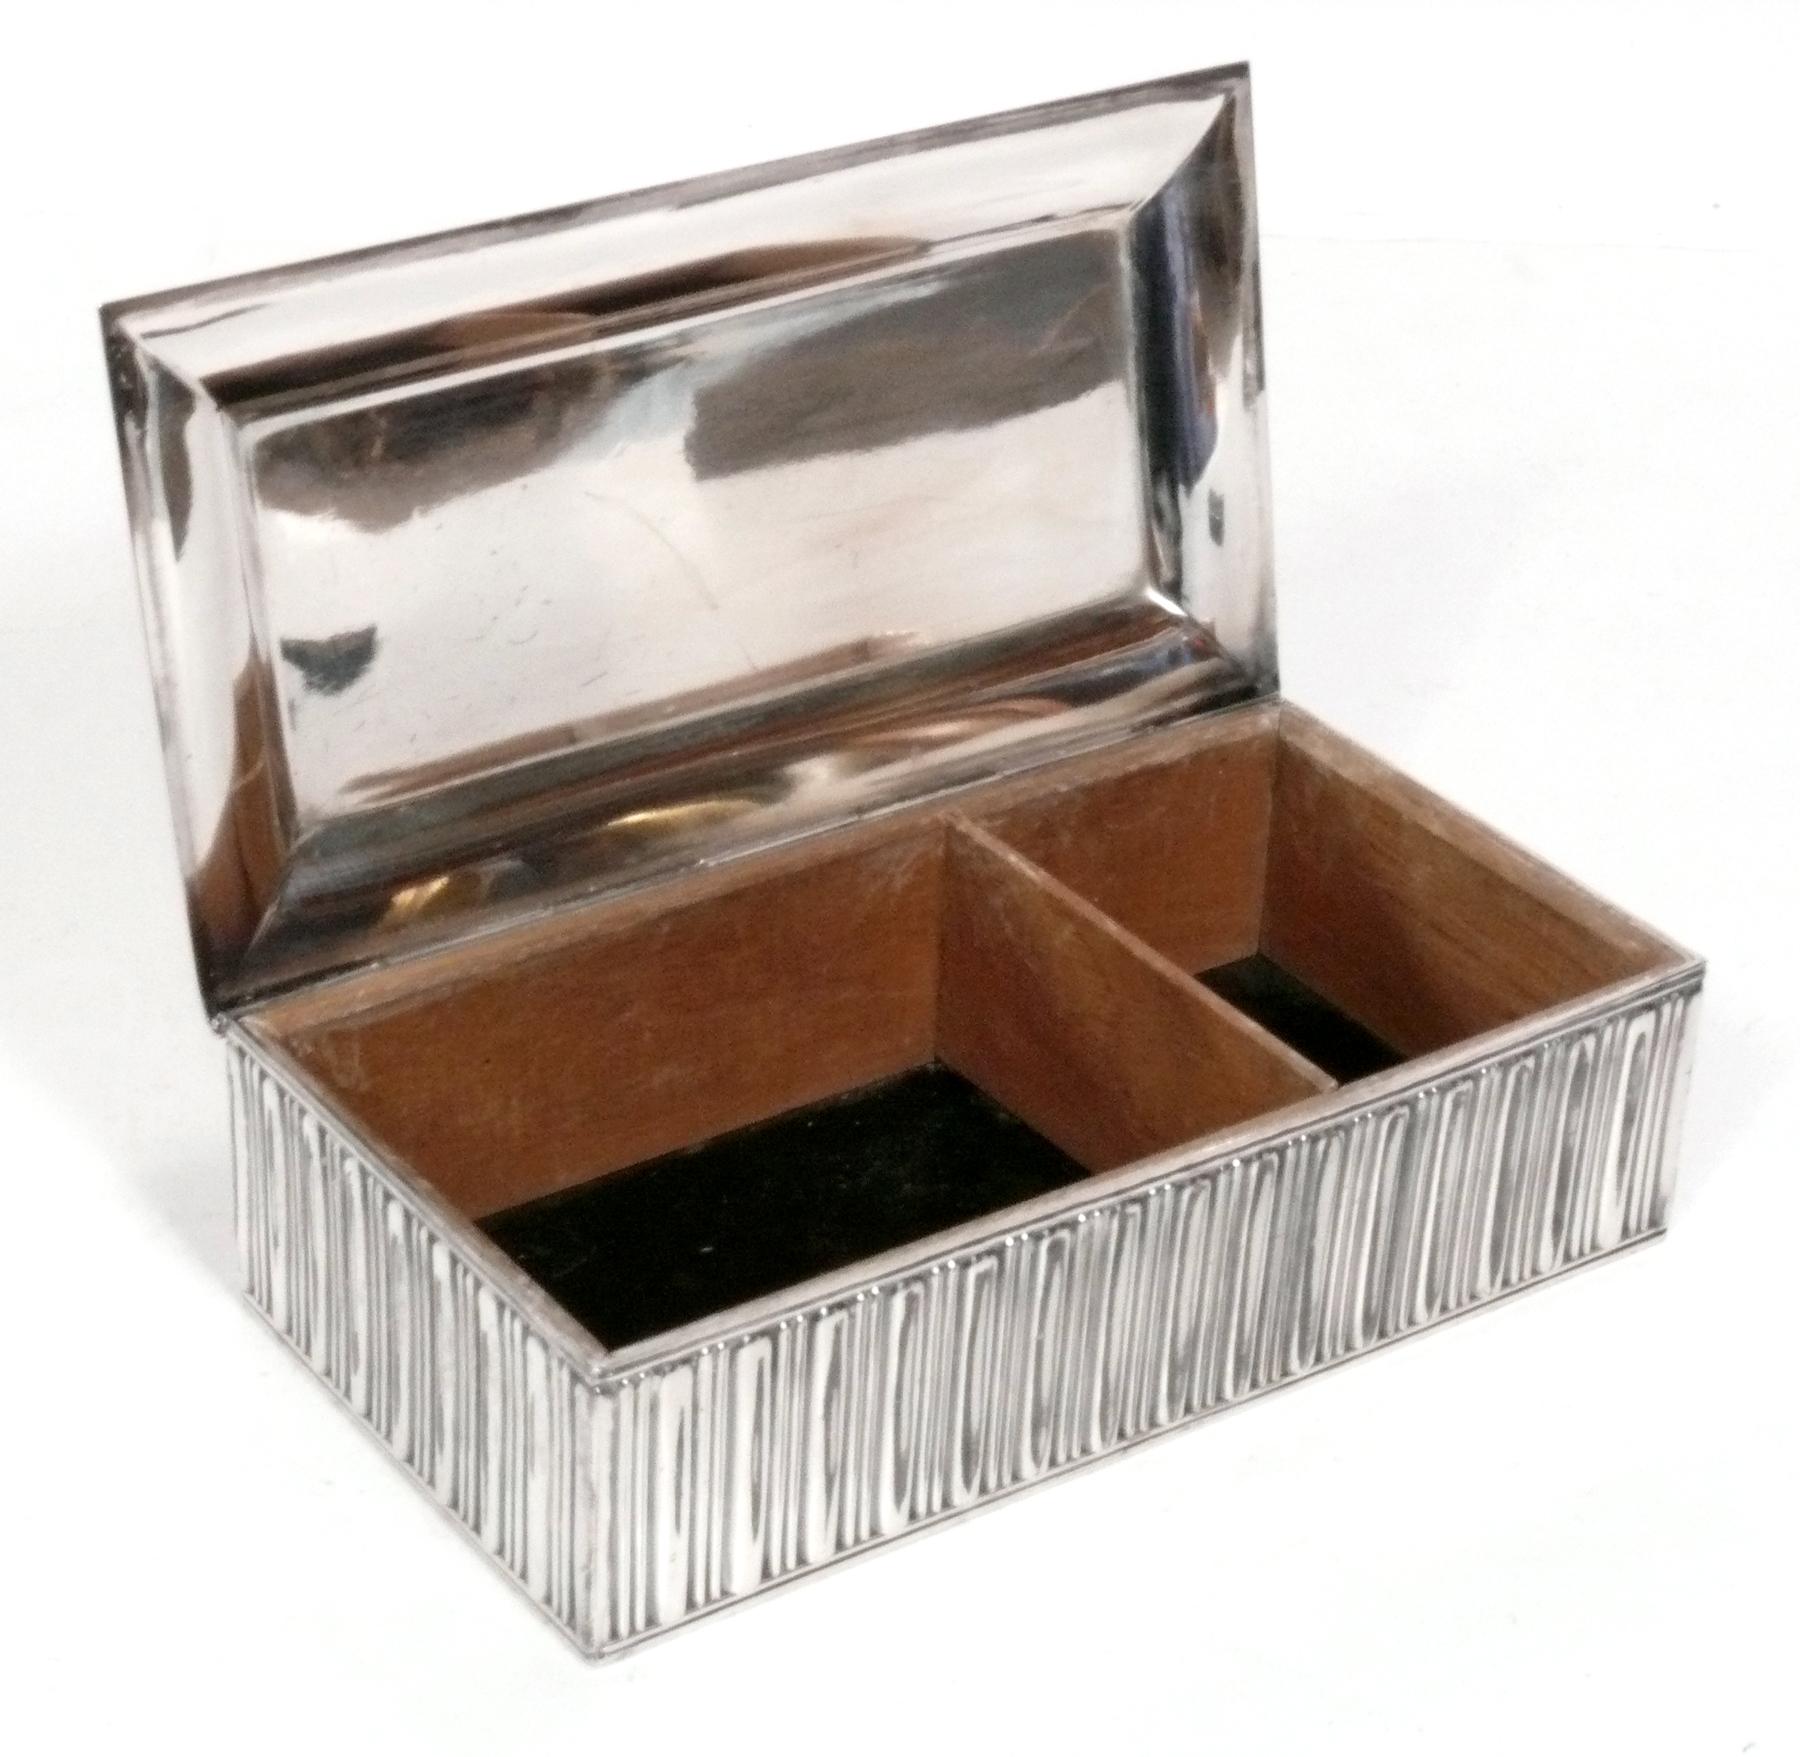 Plated Albert Feinauer for Barbour Art Deco Silver and Catalin Box